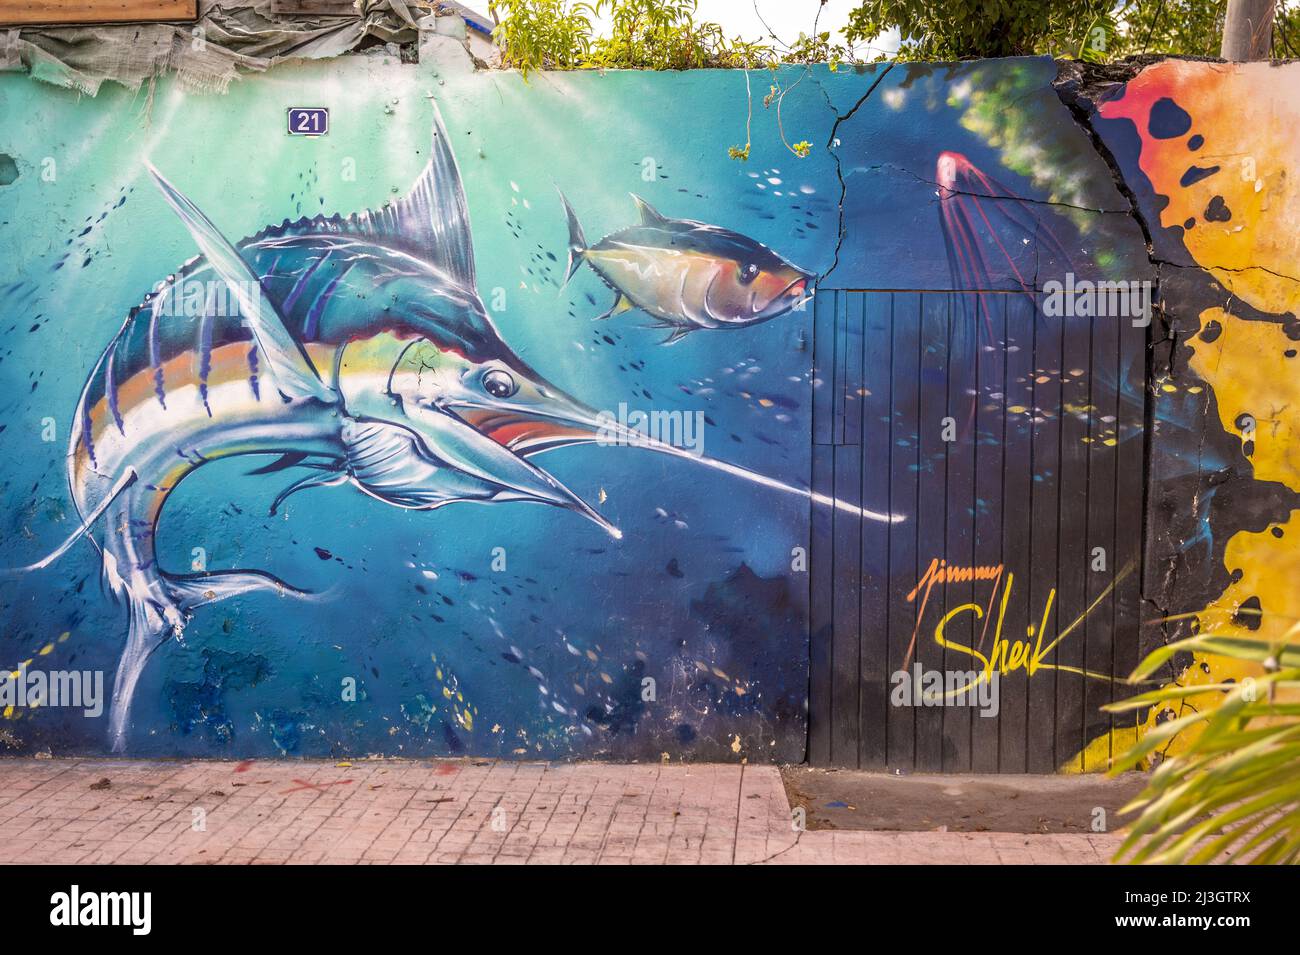 France, Lesser Antilles, French West Indies, Saint-Martin, Marigot, Marlin hunting in an underwater landscape, work by Indo-Guadeloupean street artist Jimmy SHEIKBOUDHOU Stock Photo